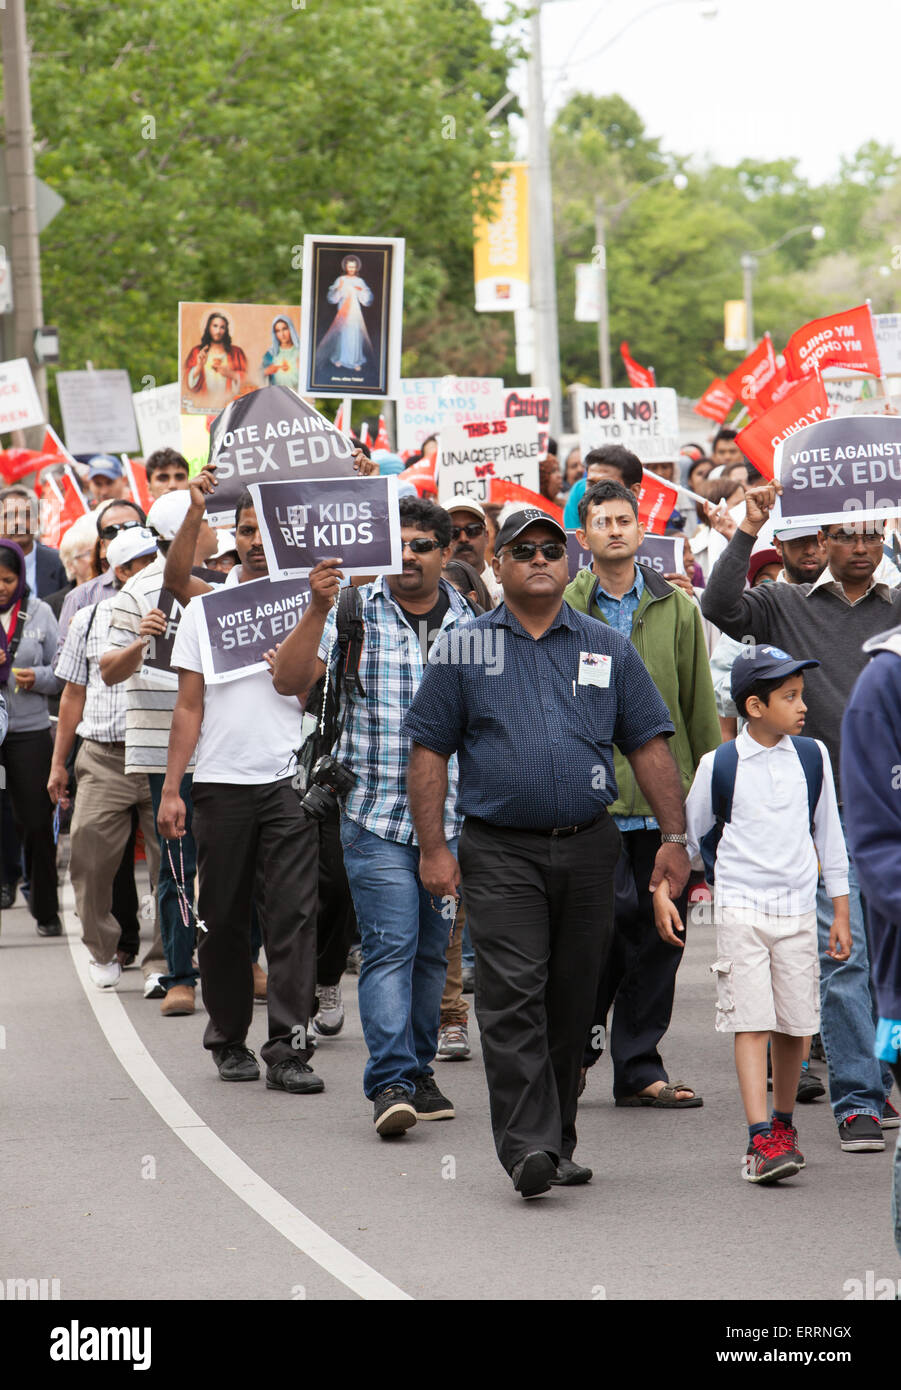 Toronto, Canada. 7th June, 2015. Thousands of people joined Sit-in and March in Queen’s Park to protest the Liberal government’s controversial sex-education curriculum.   June 7 , 2015 in  Toronto, Canada. Stock Photo